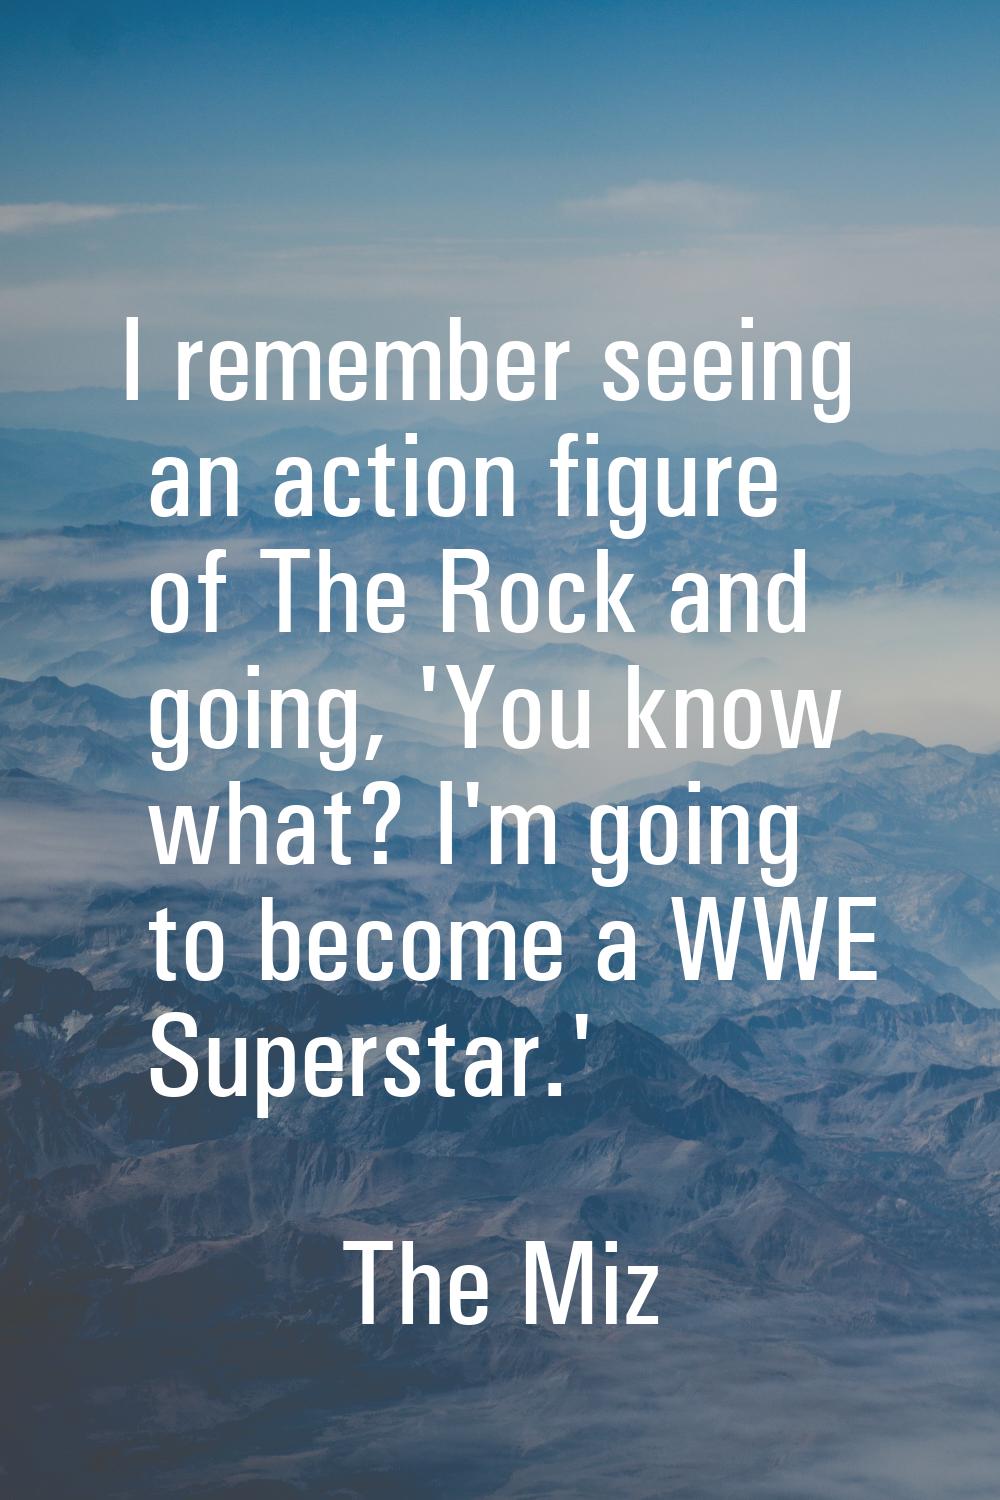 I remember seeing an action figure of The Rock and going, 'You know what? I'm going to become a WWE